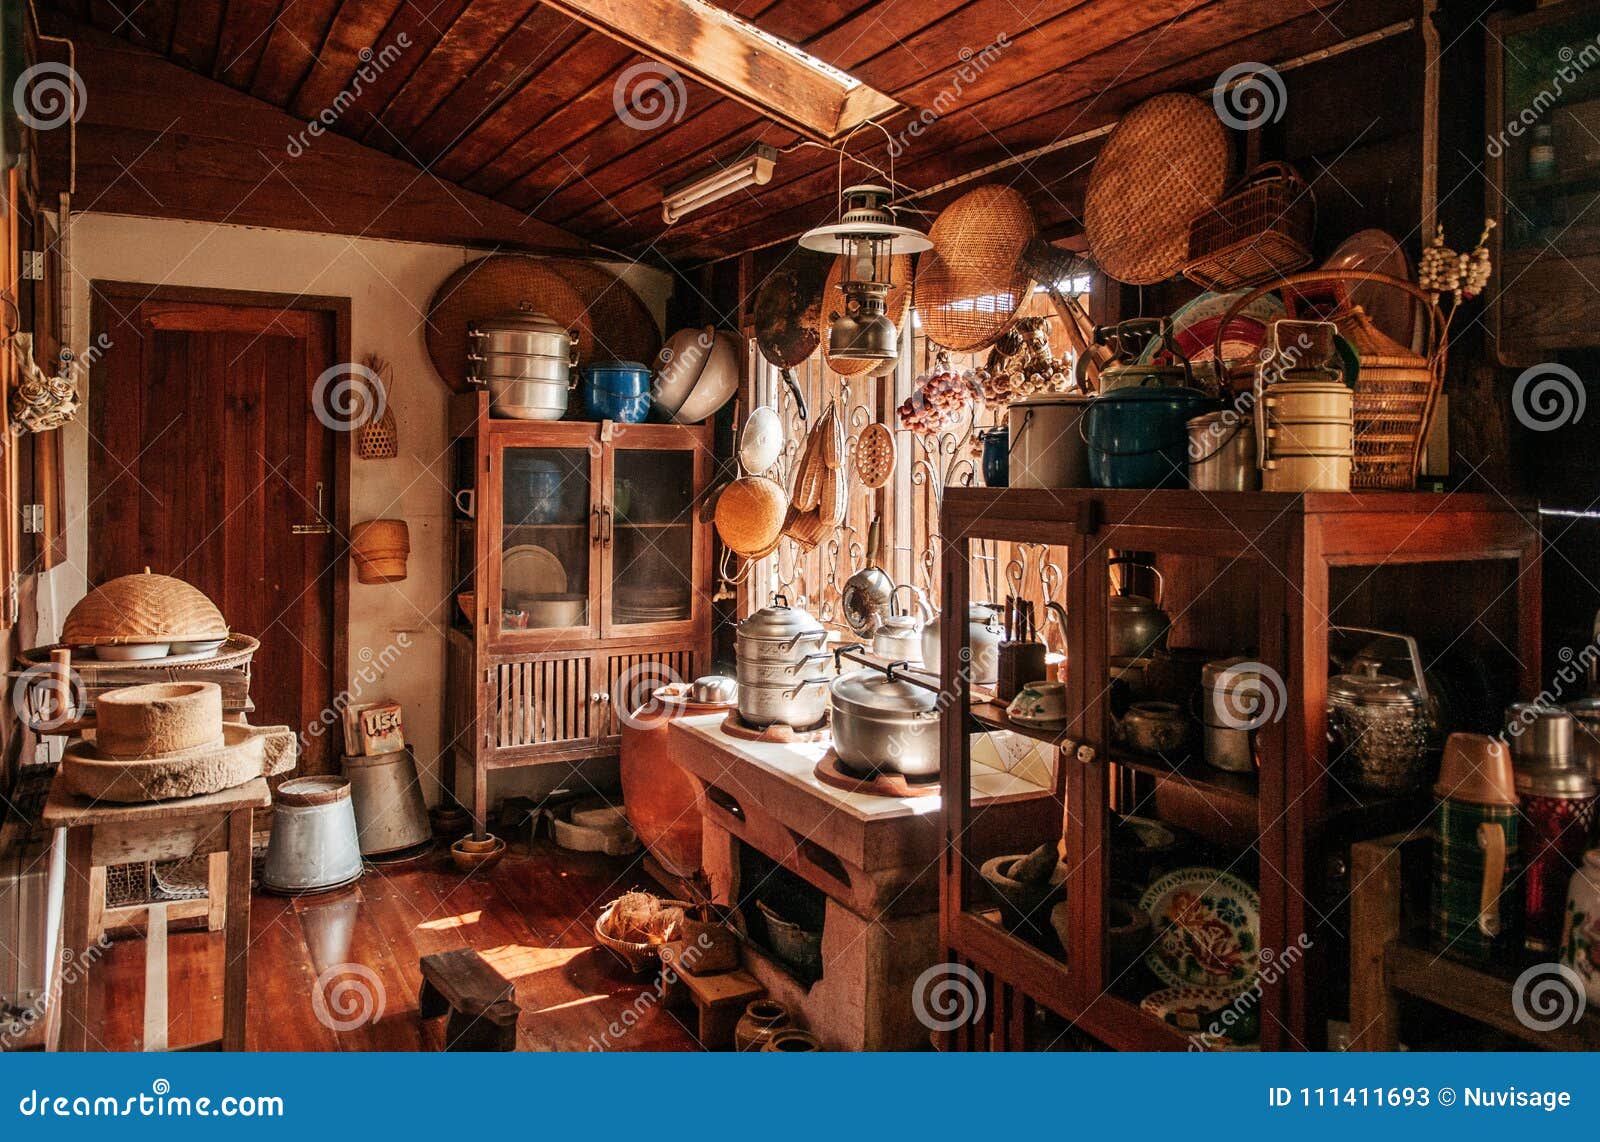 Interpersonal Min crude oil Rustic Wooden Vintage Kitchen in Country House Interior Decoration for Thai  Style House Editorial Stock Photo - Image of clean, farmhouse: 111411693